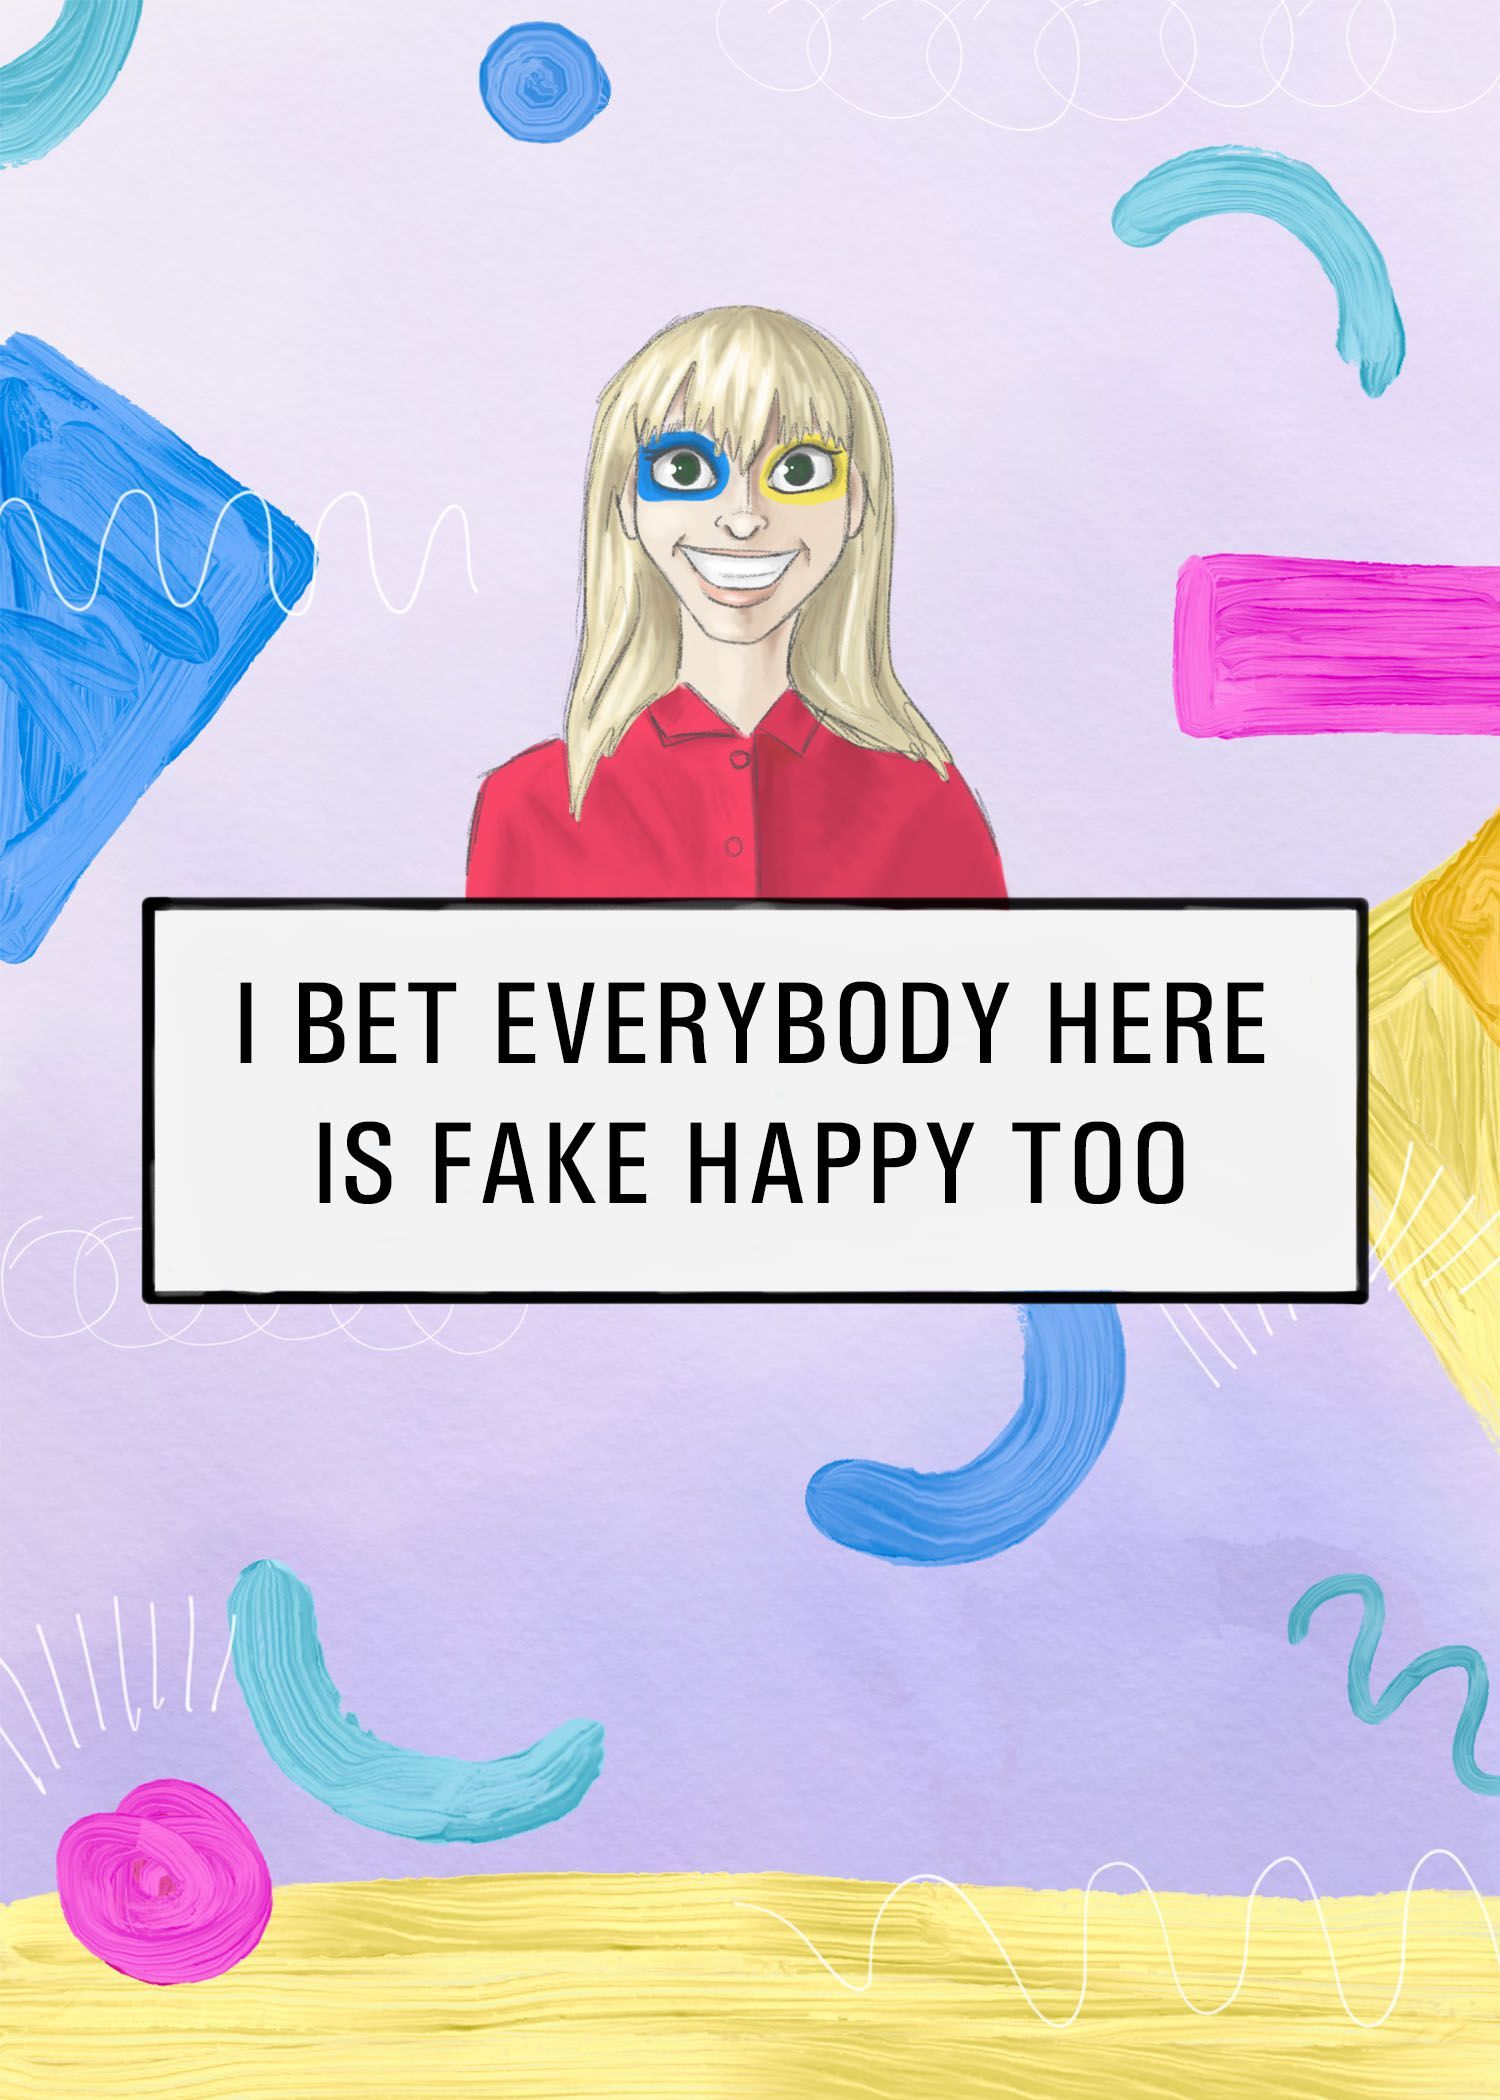 Paramore After Laughter Fake Happy Driven Snow Art. Paramore lyrics, Paramore after laughter, Paramore wallpaper